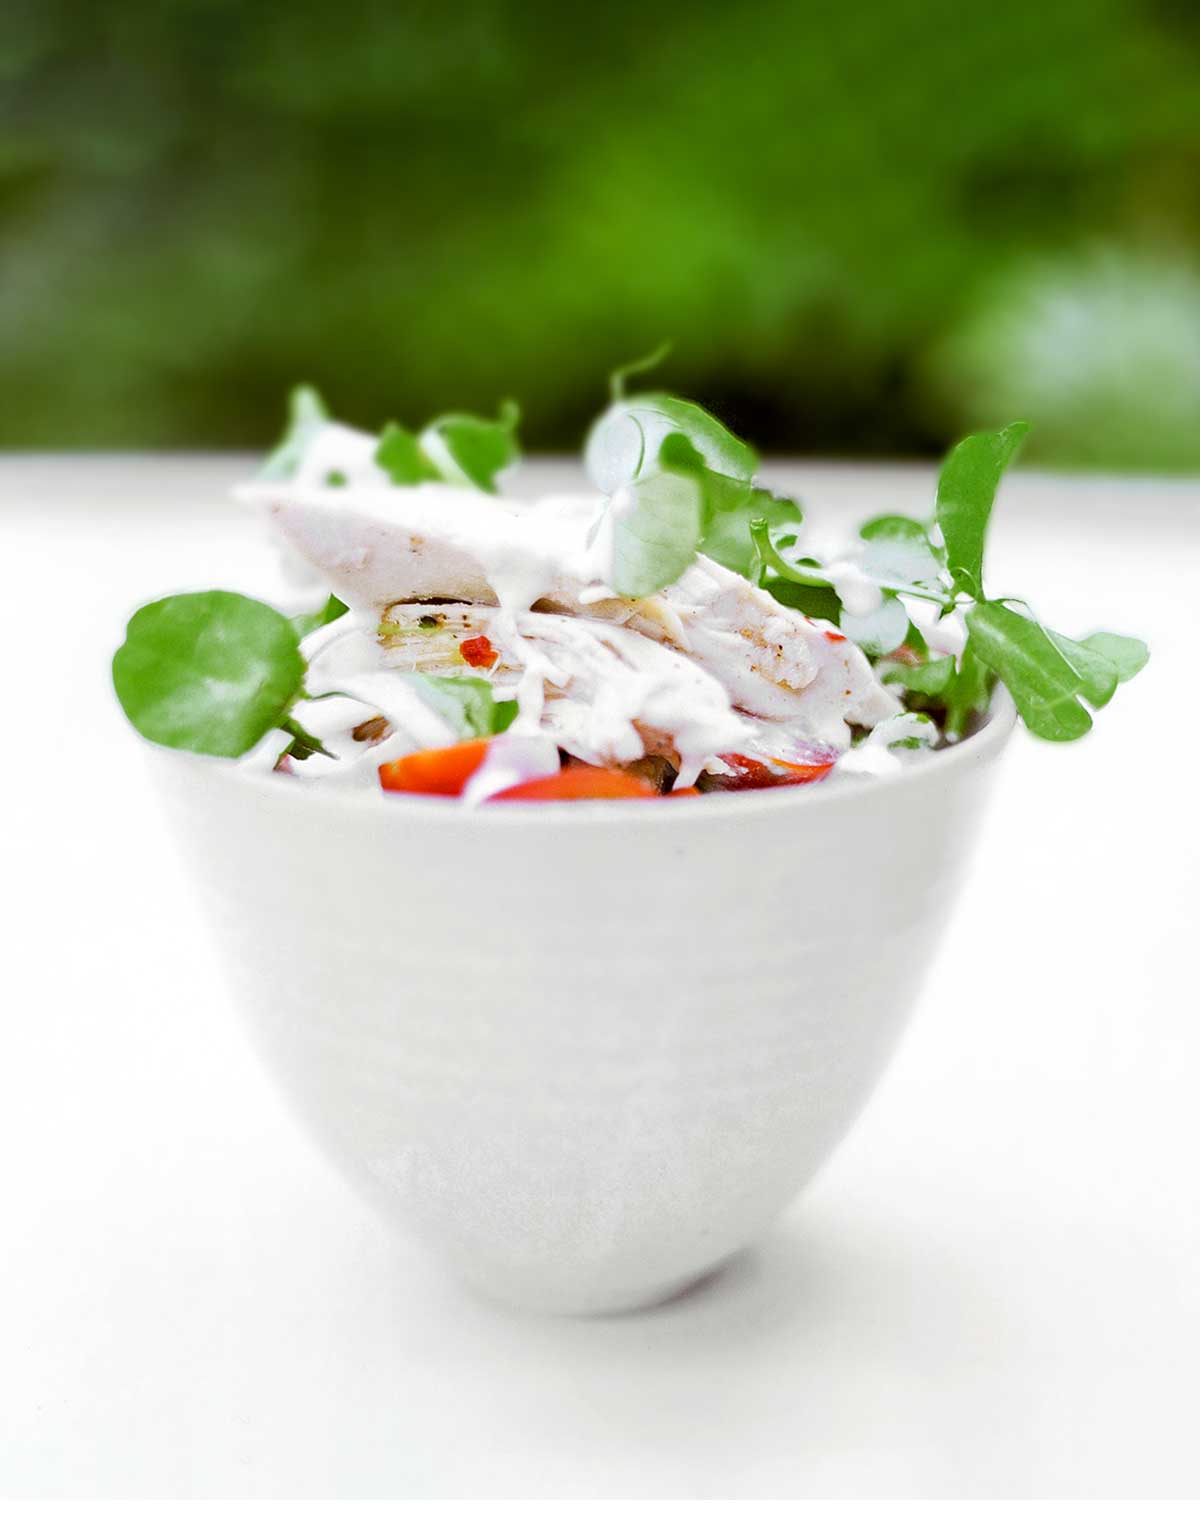 A small white bowl filled with chicken-pea shoot salad.